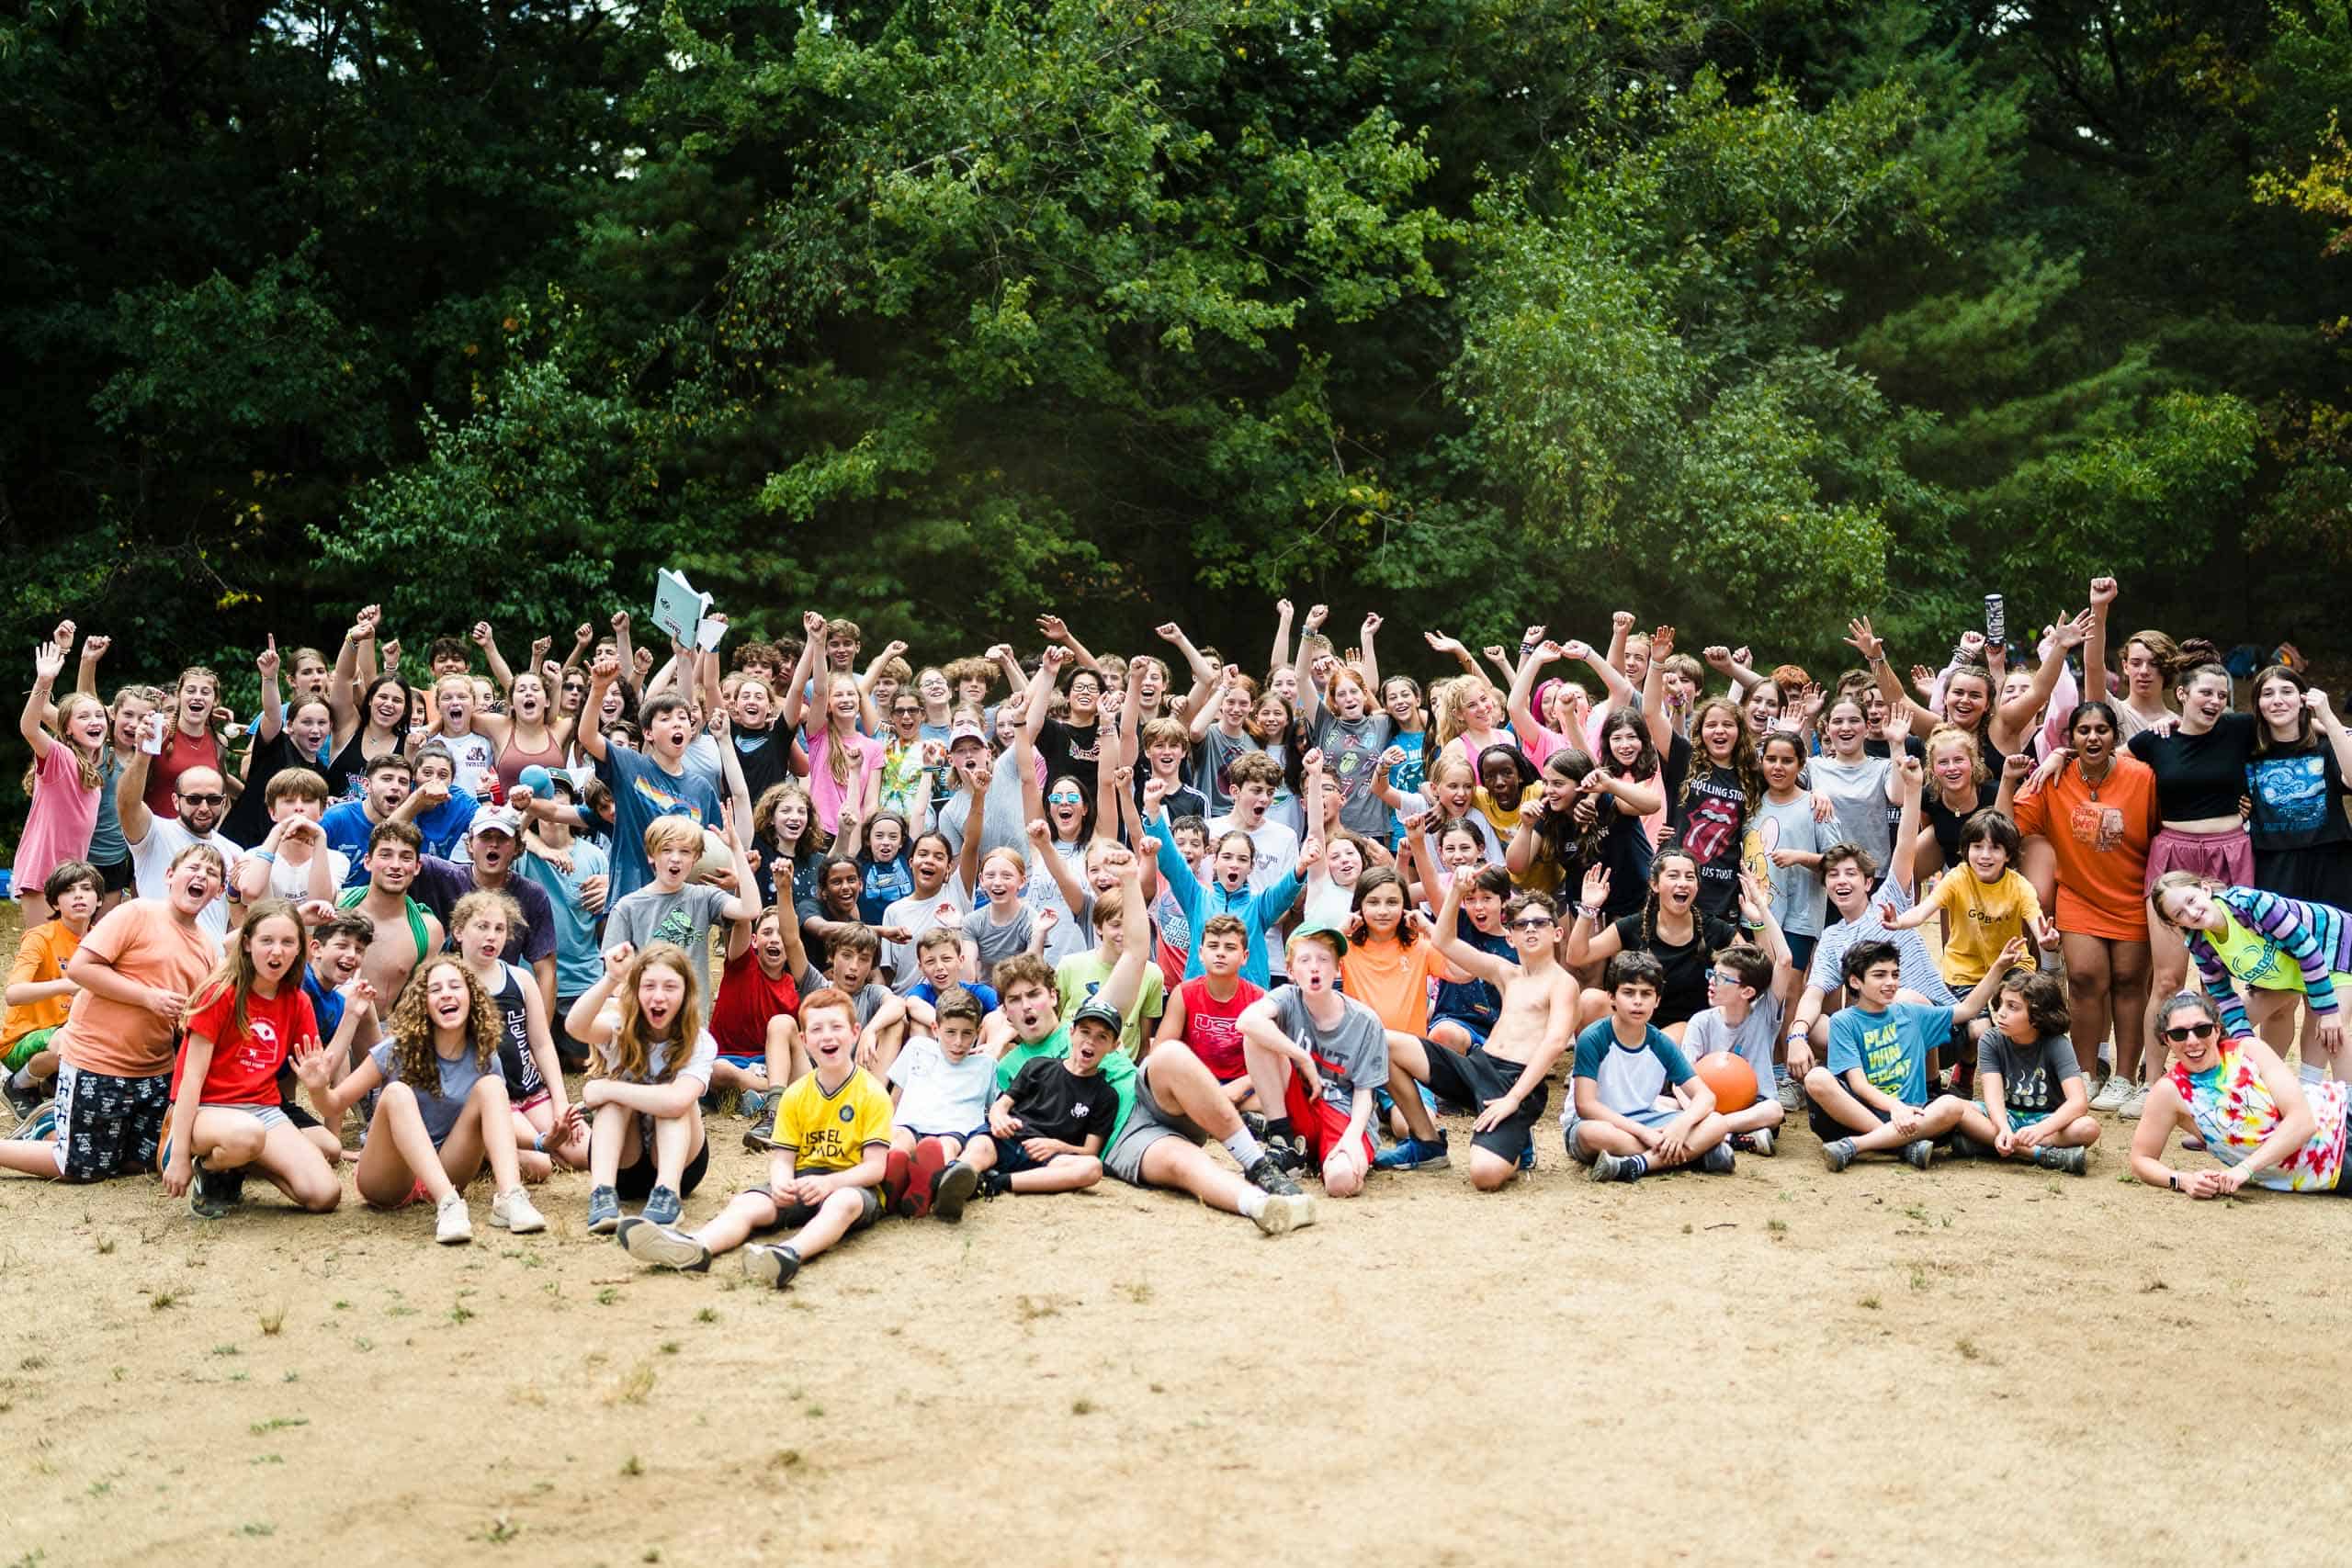 Large group photo of campers at JCC Camp Grossman.